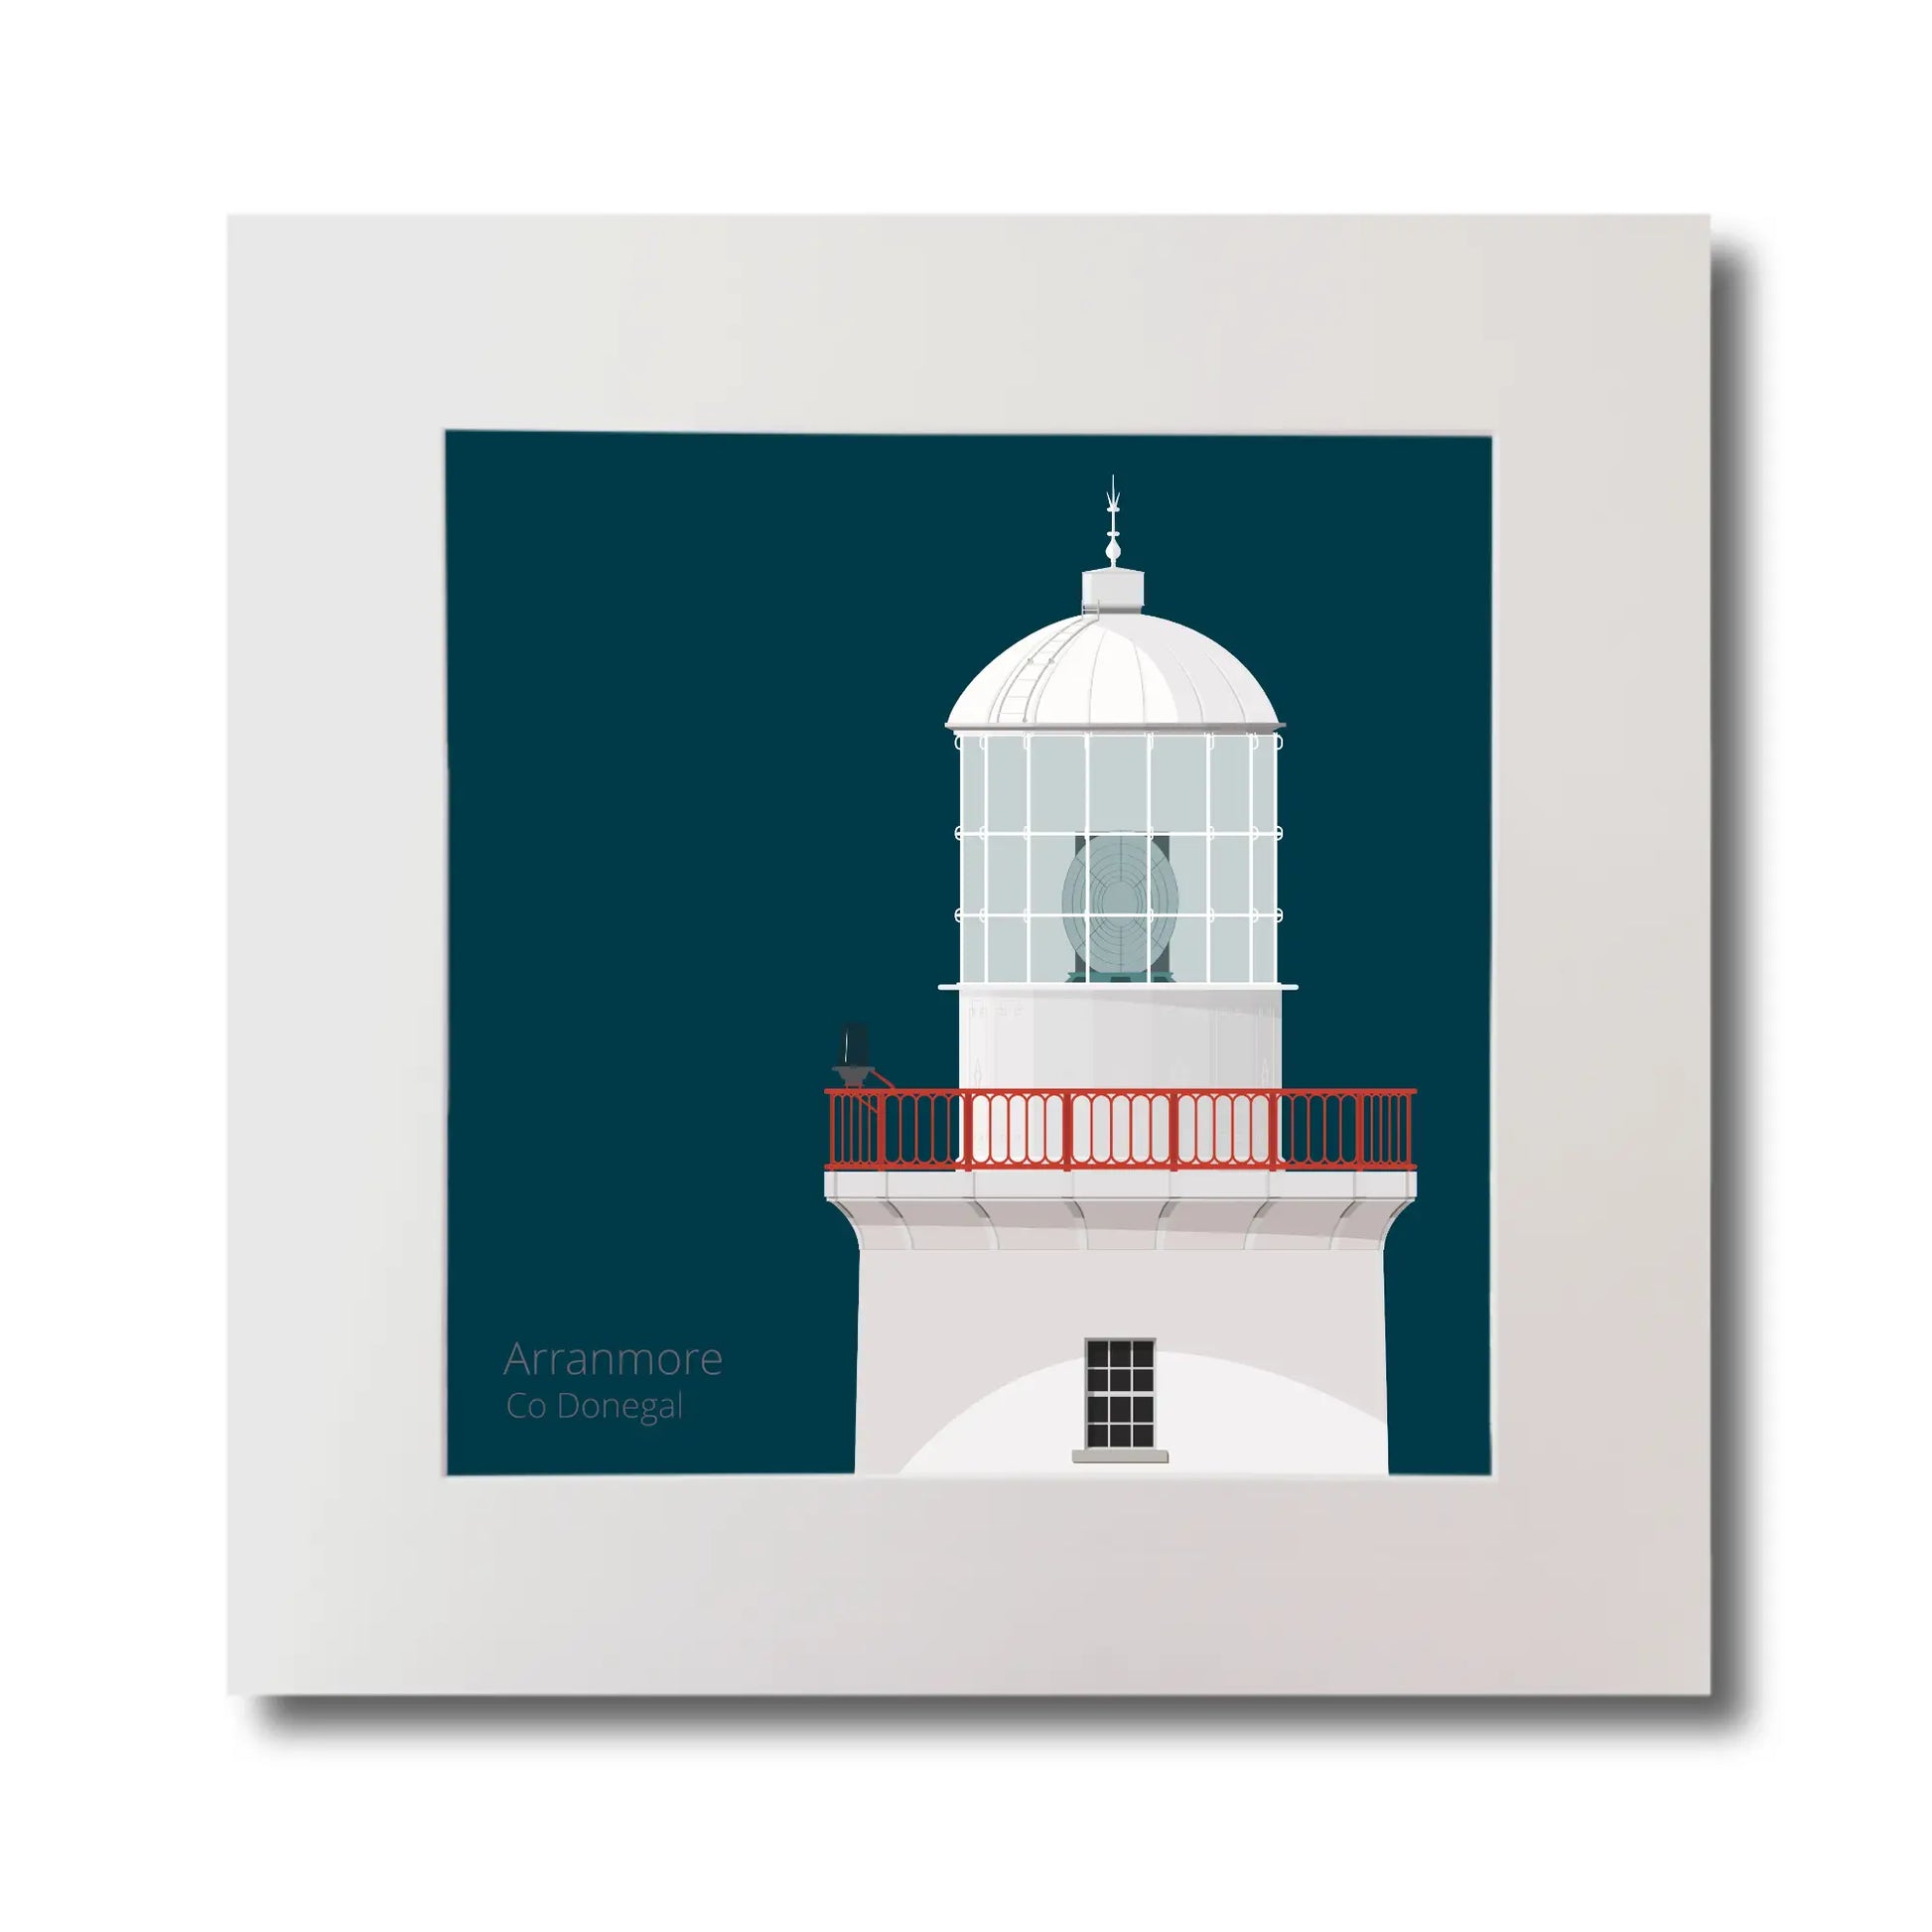 Illustration of Arranmore lighthouse on a midnight blue background, mounted and measuring 30x30cm.